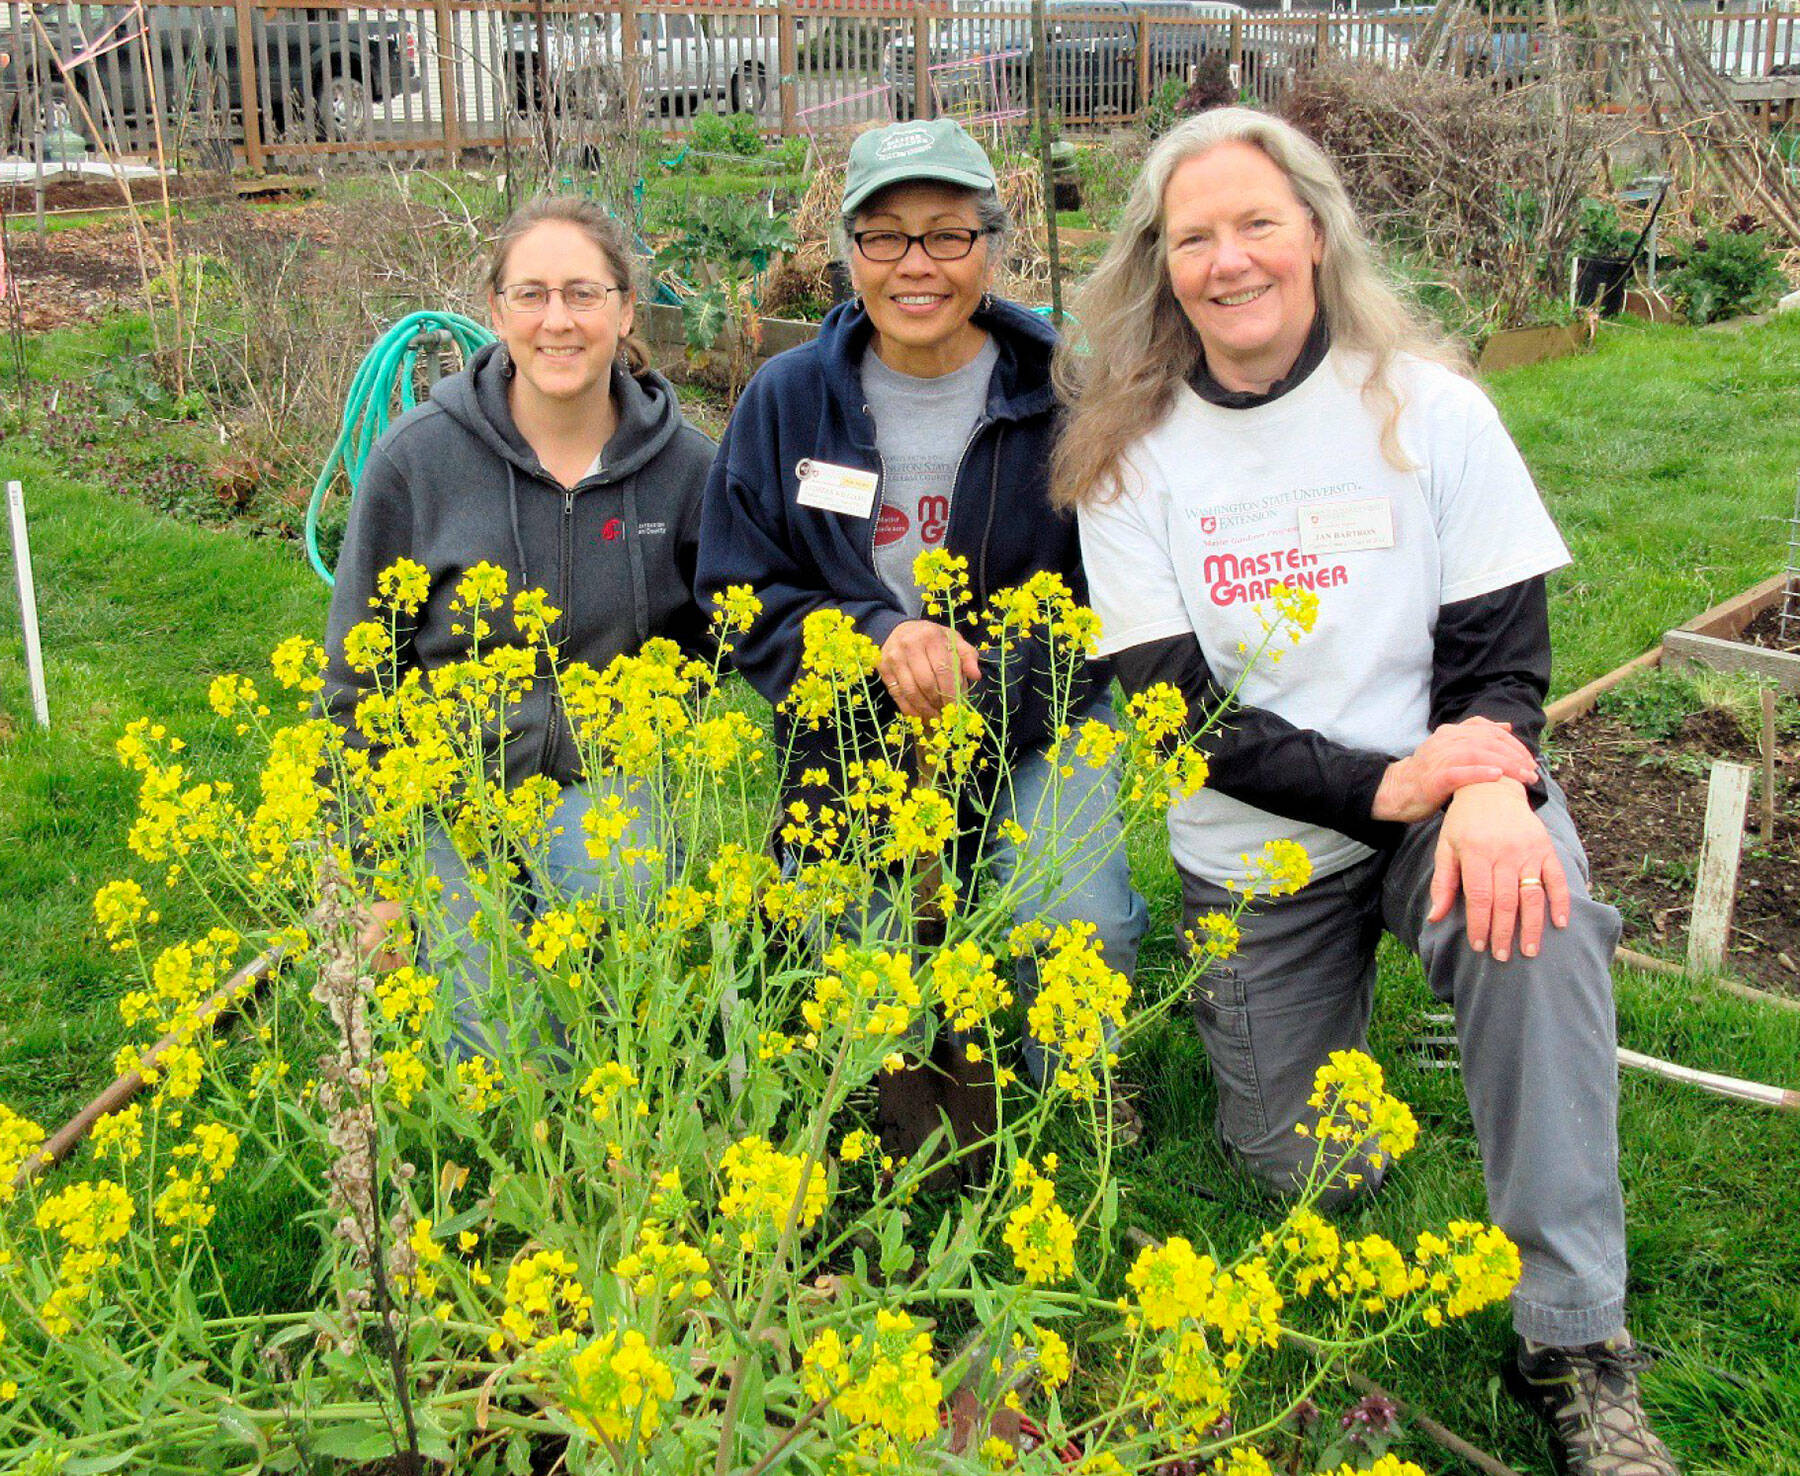 Laurel Moulton, left, Audreen Williams and Jan Barton will lead an educational walk through the Fifth Street Community Garden on Saturday in Port Angeles.